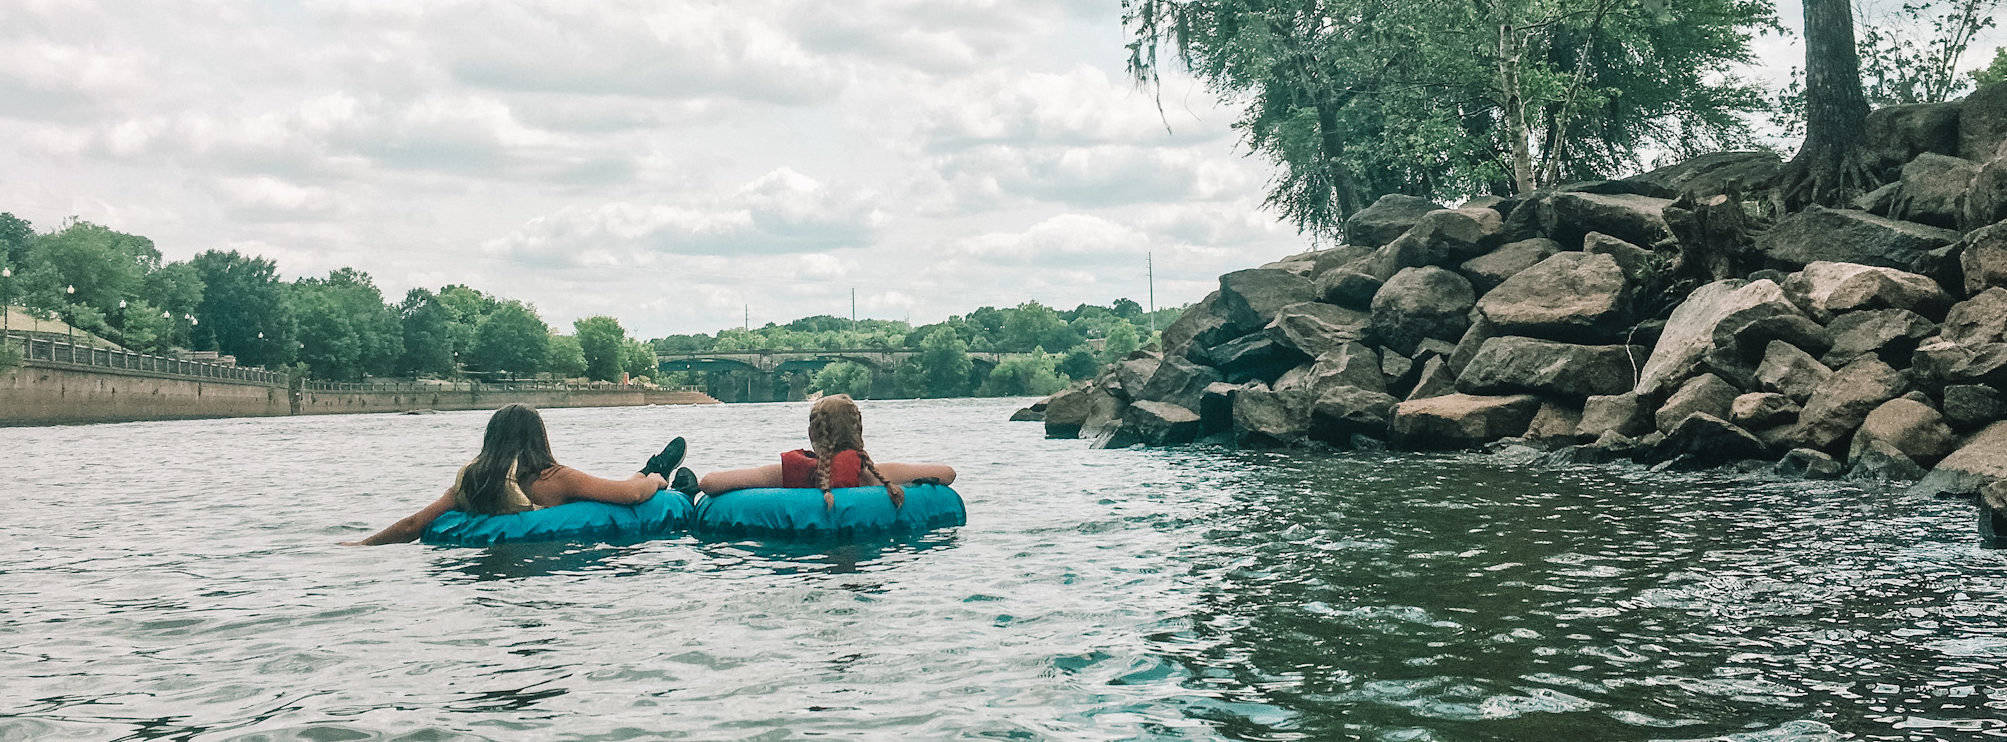 floating down chattahoochee river with tube rentals